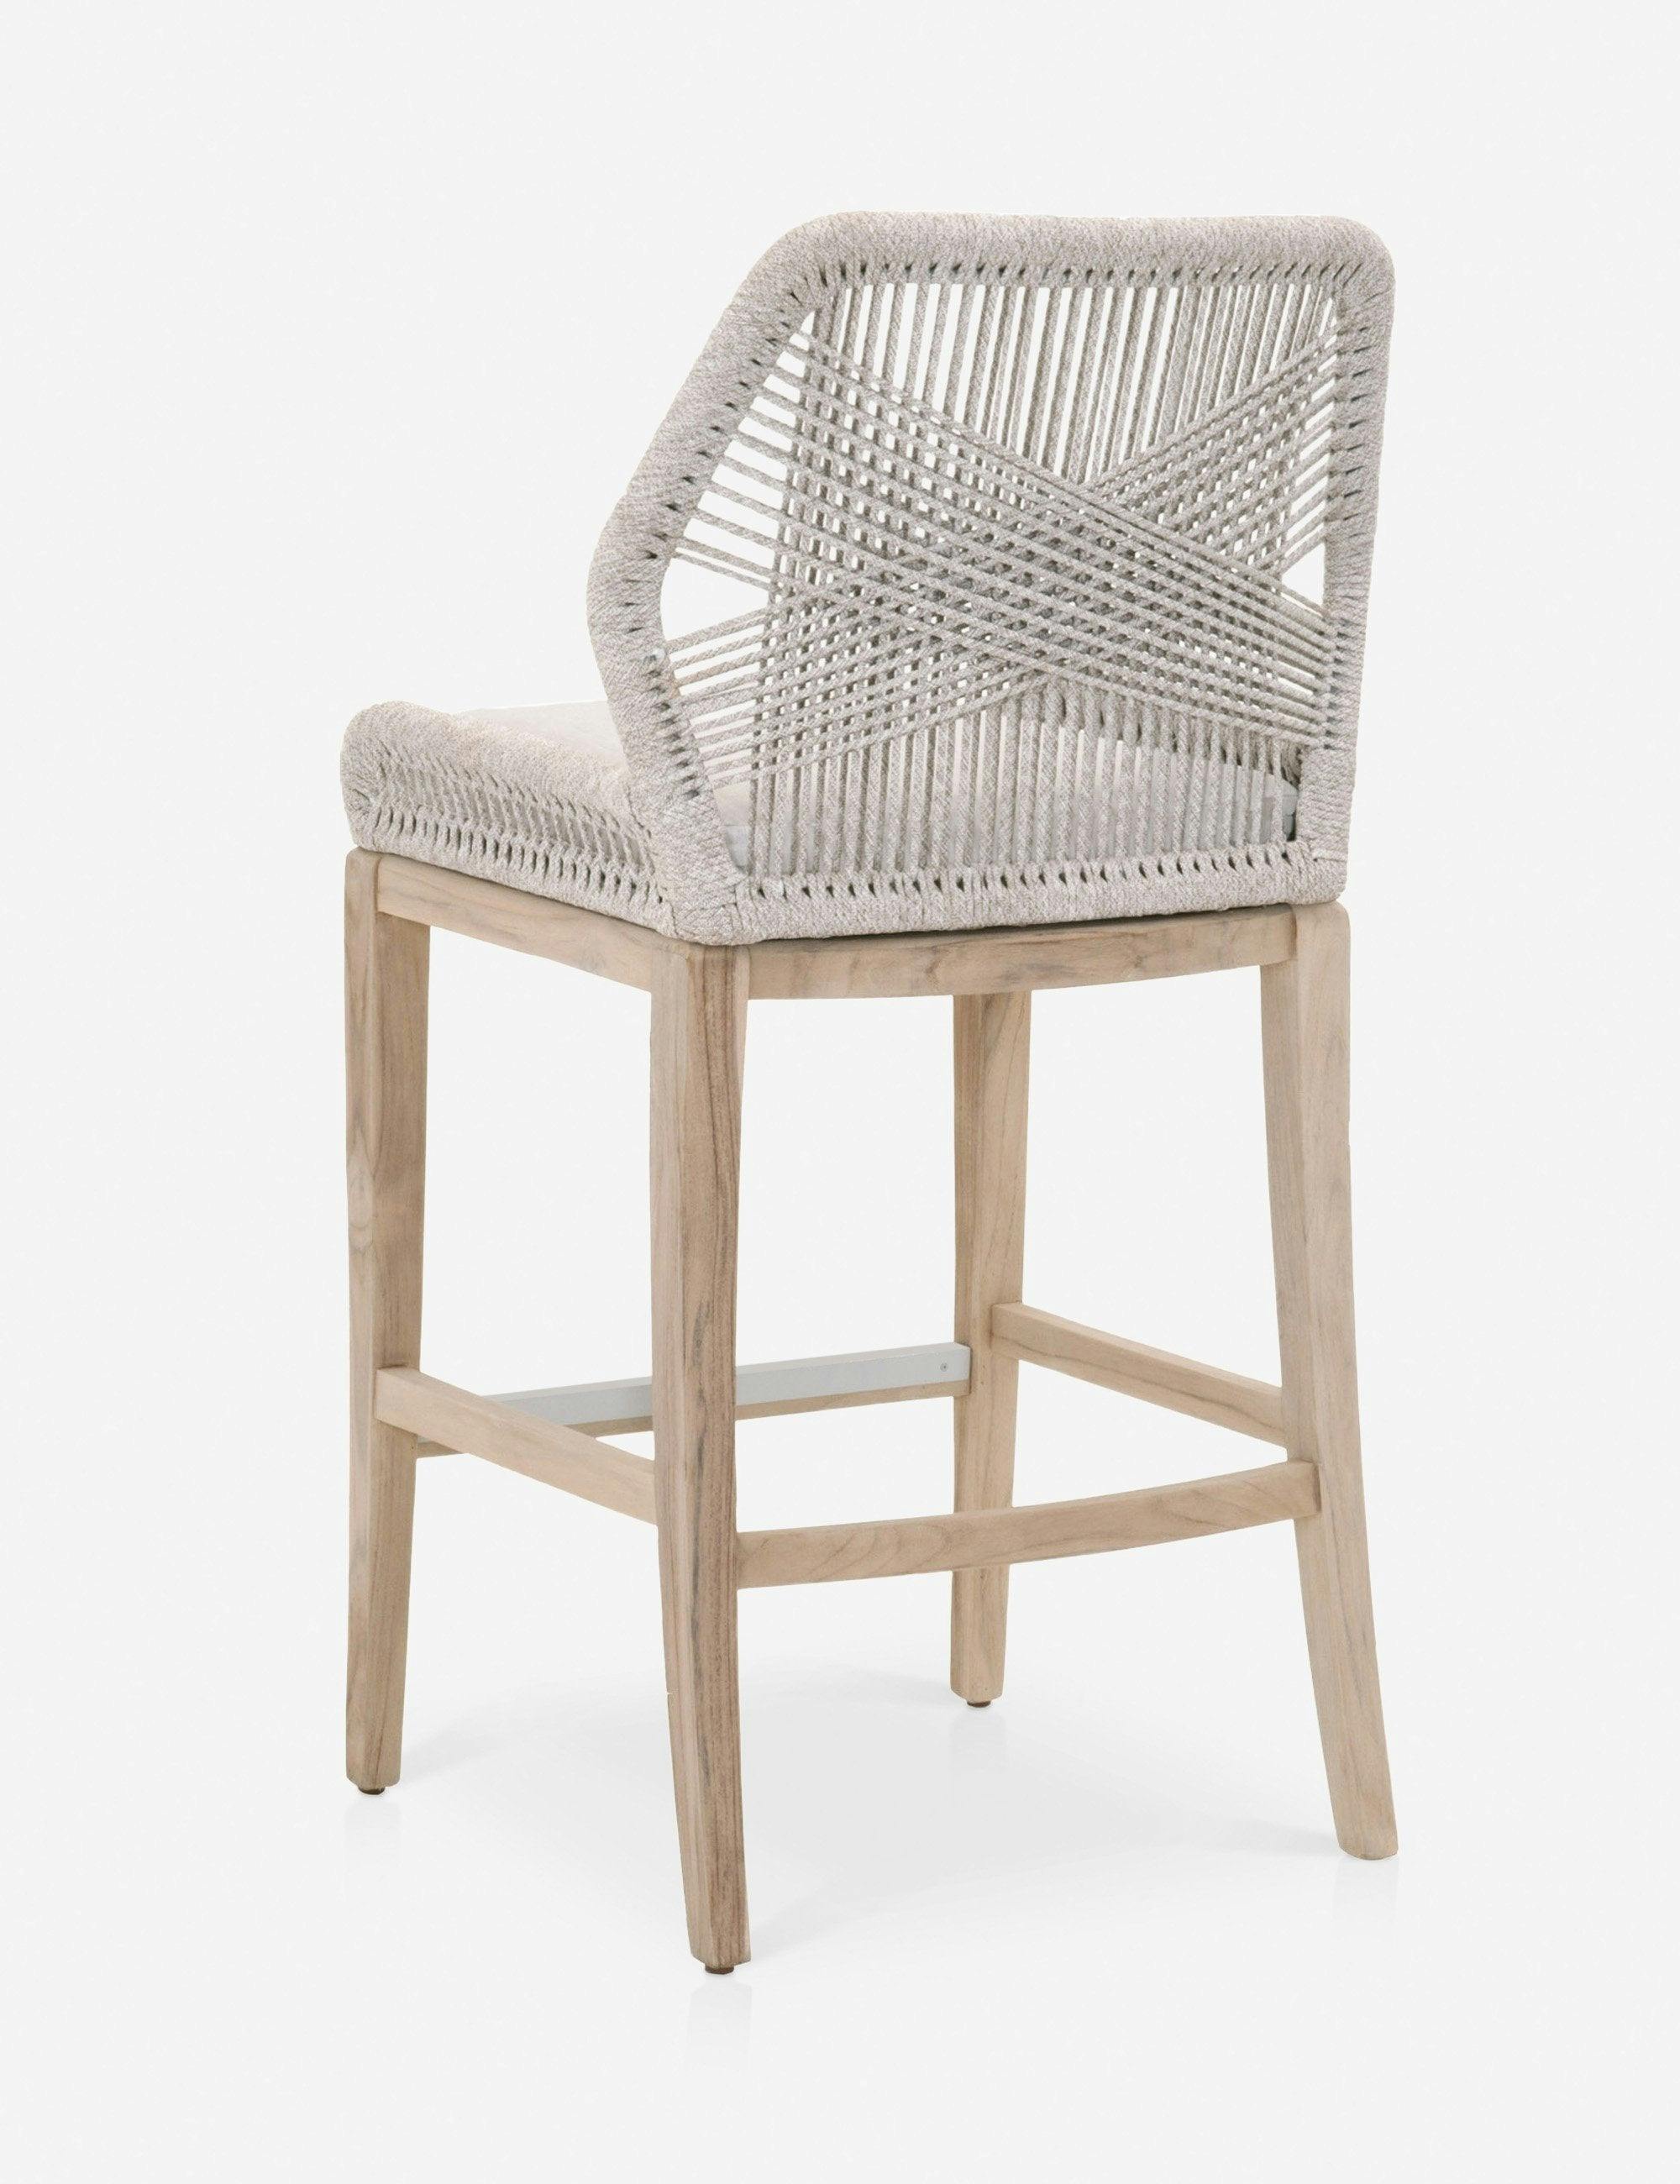 Taupe & White Coastal Loom Woven Outdoor Bar Stool with Cushions